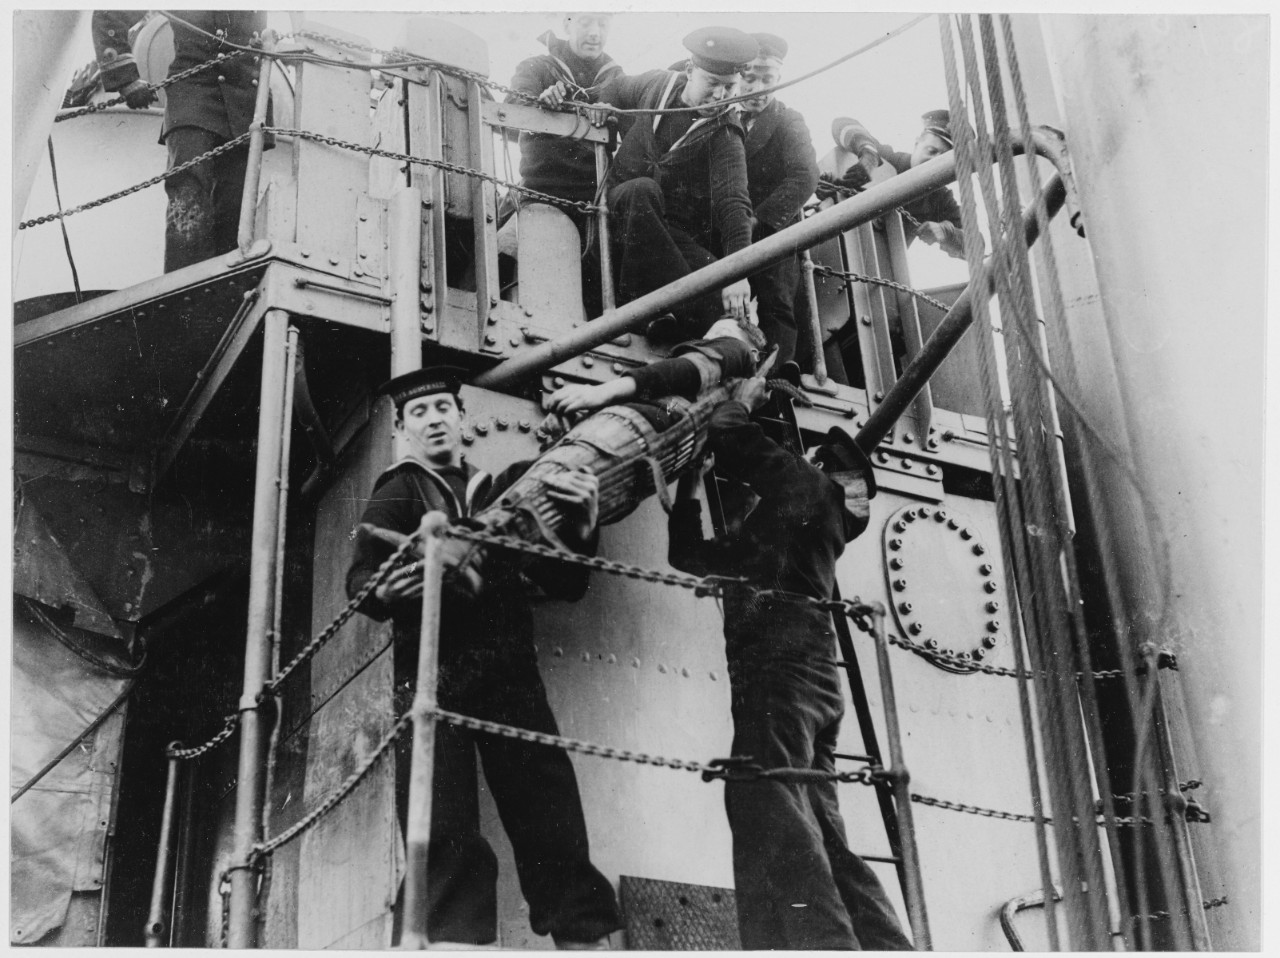 Removing wounded man from difficult position in superstructure. H.M.A.S. AUSTRALIA